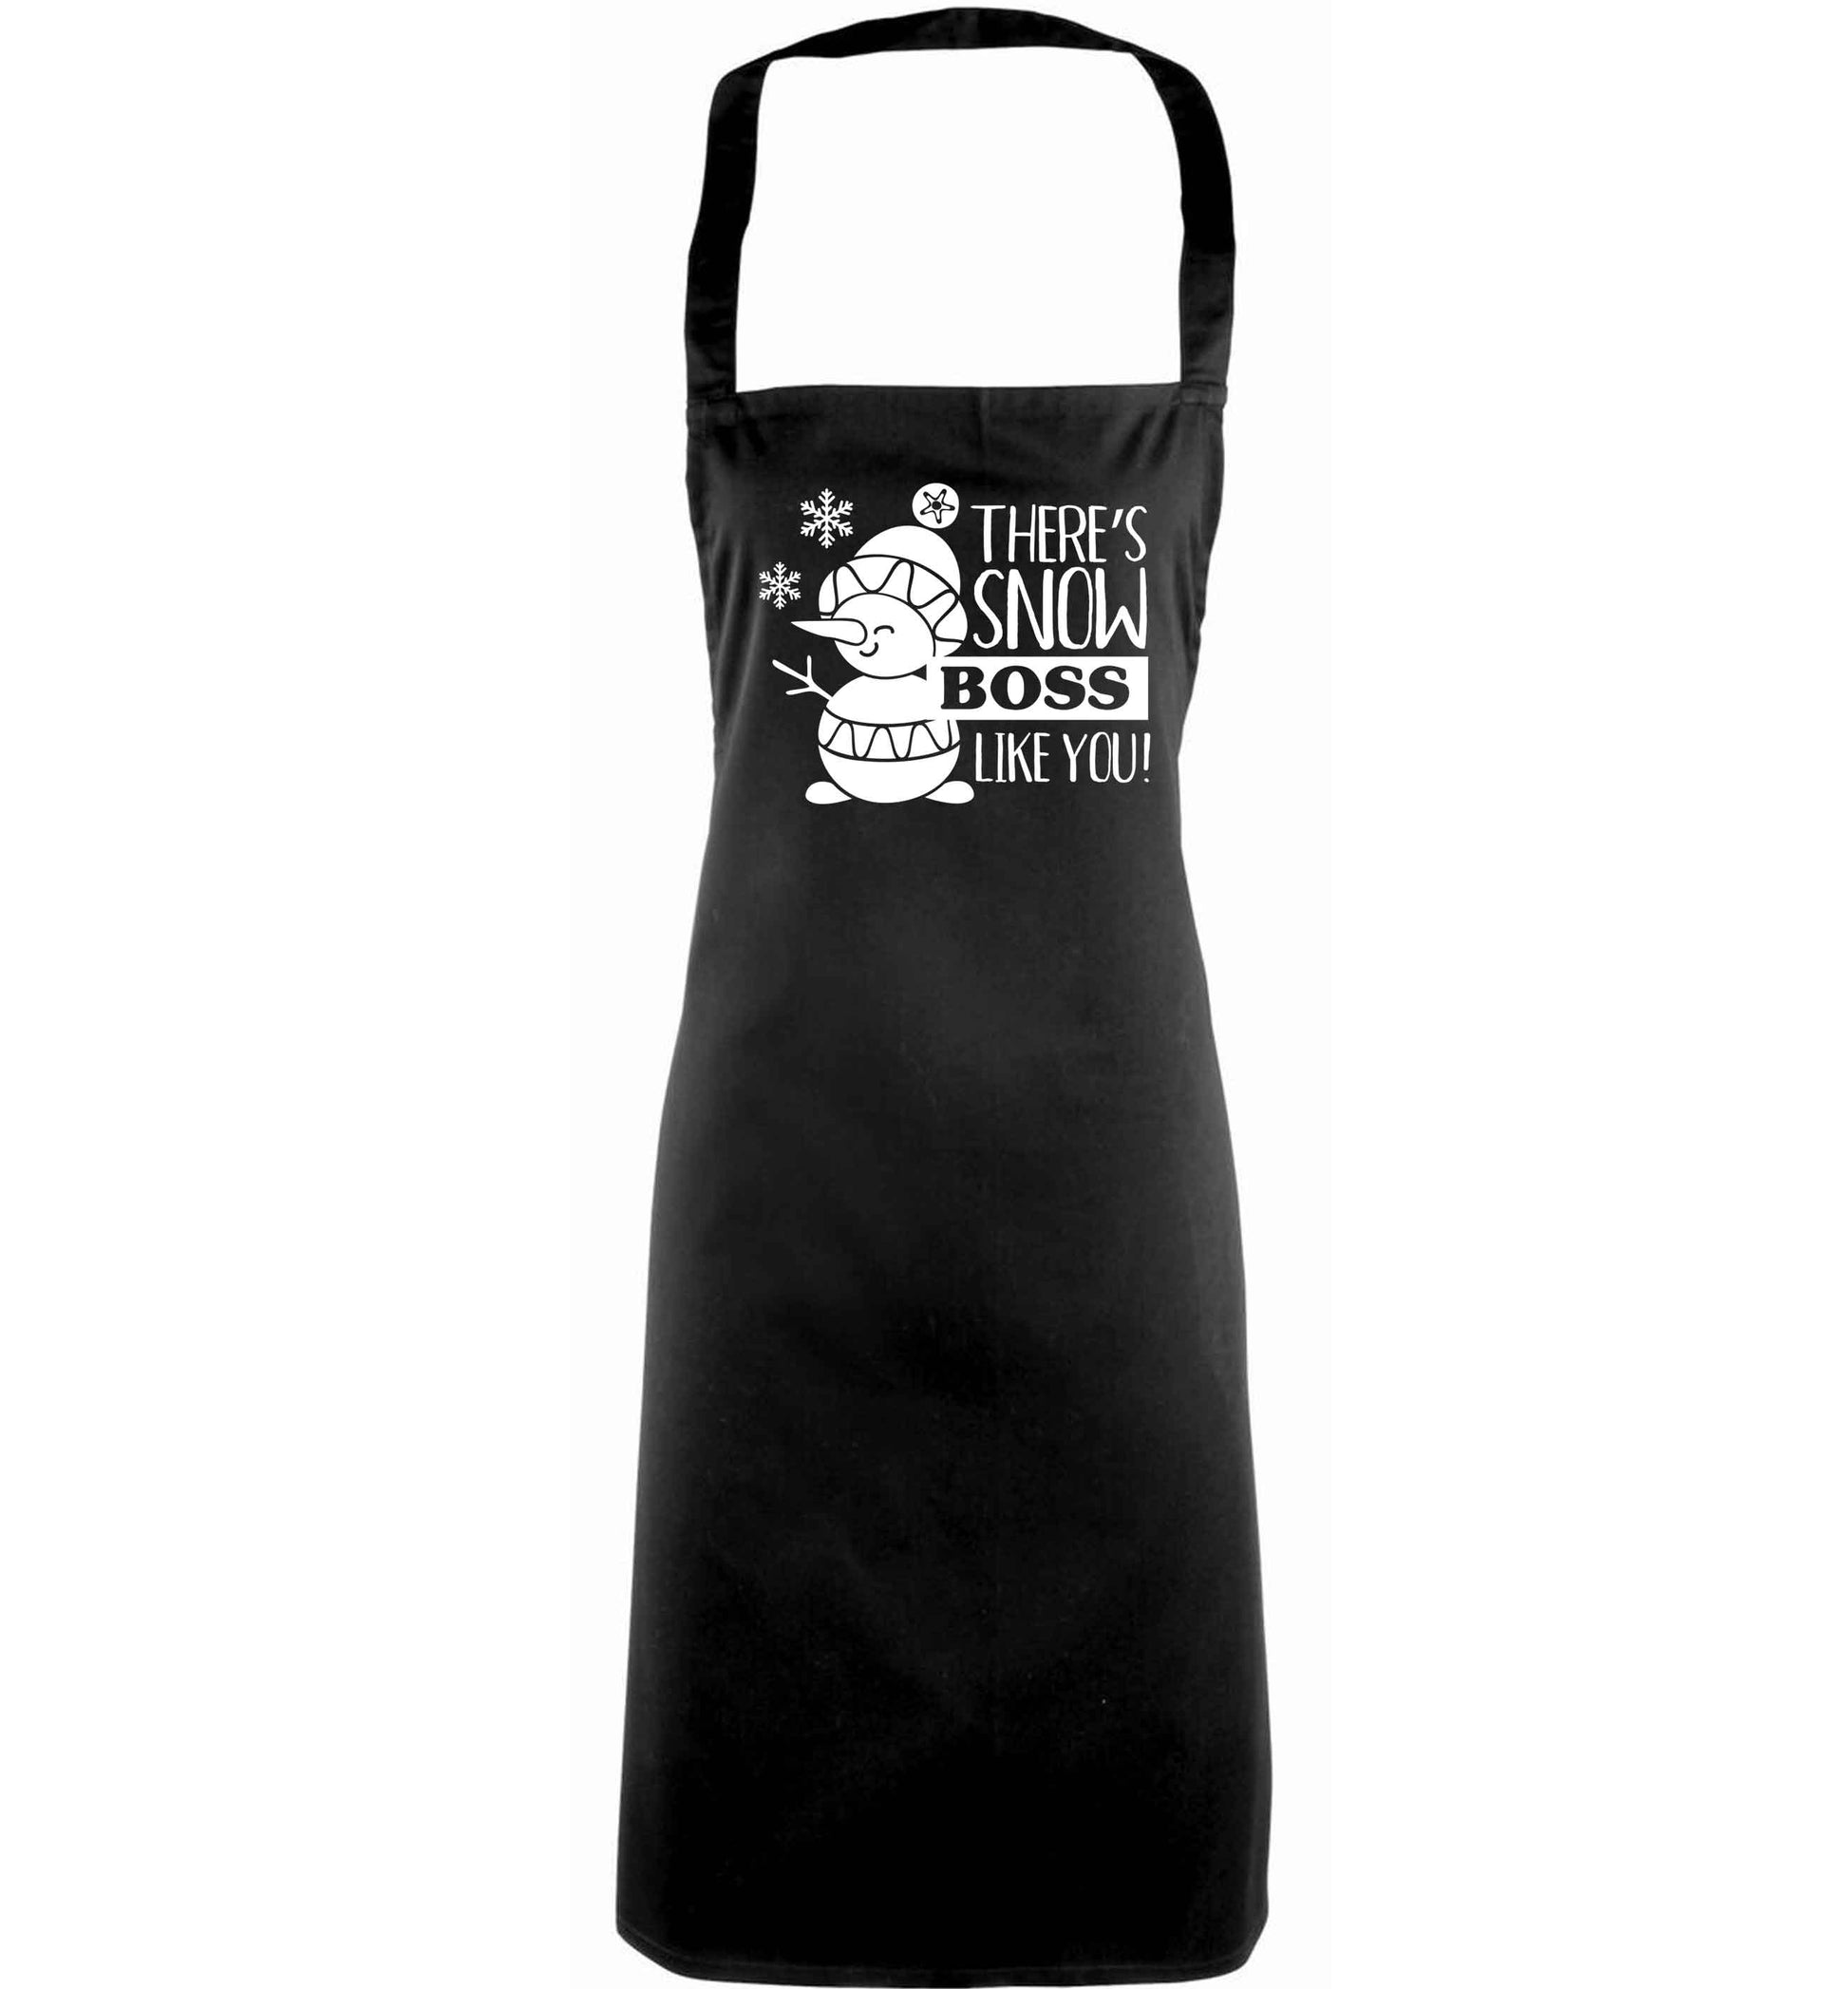 There's snow boss like you adults black apron